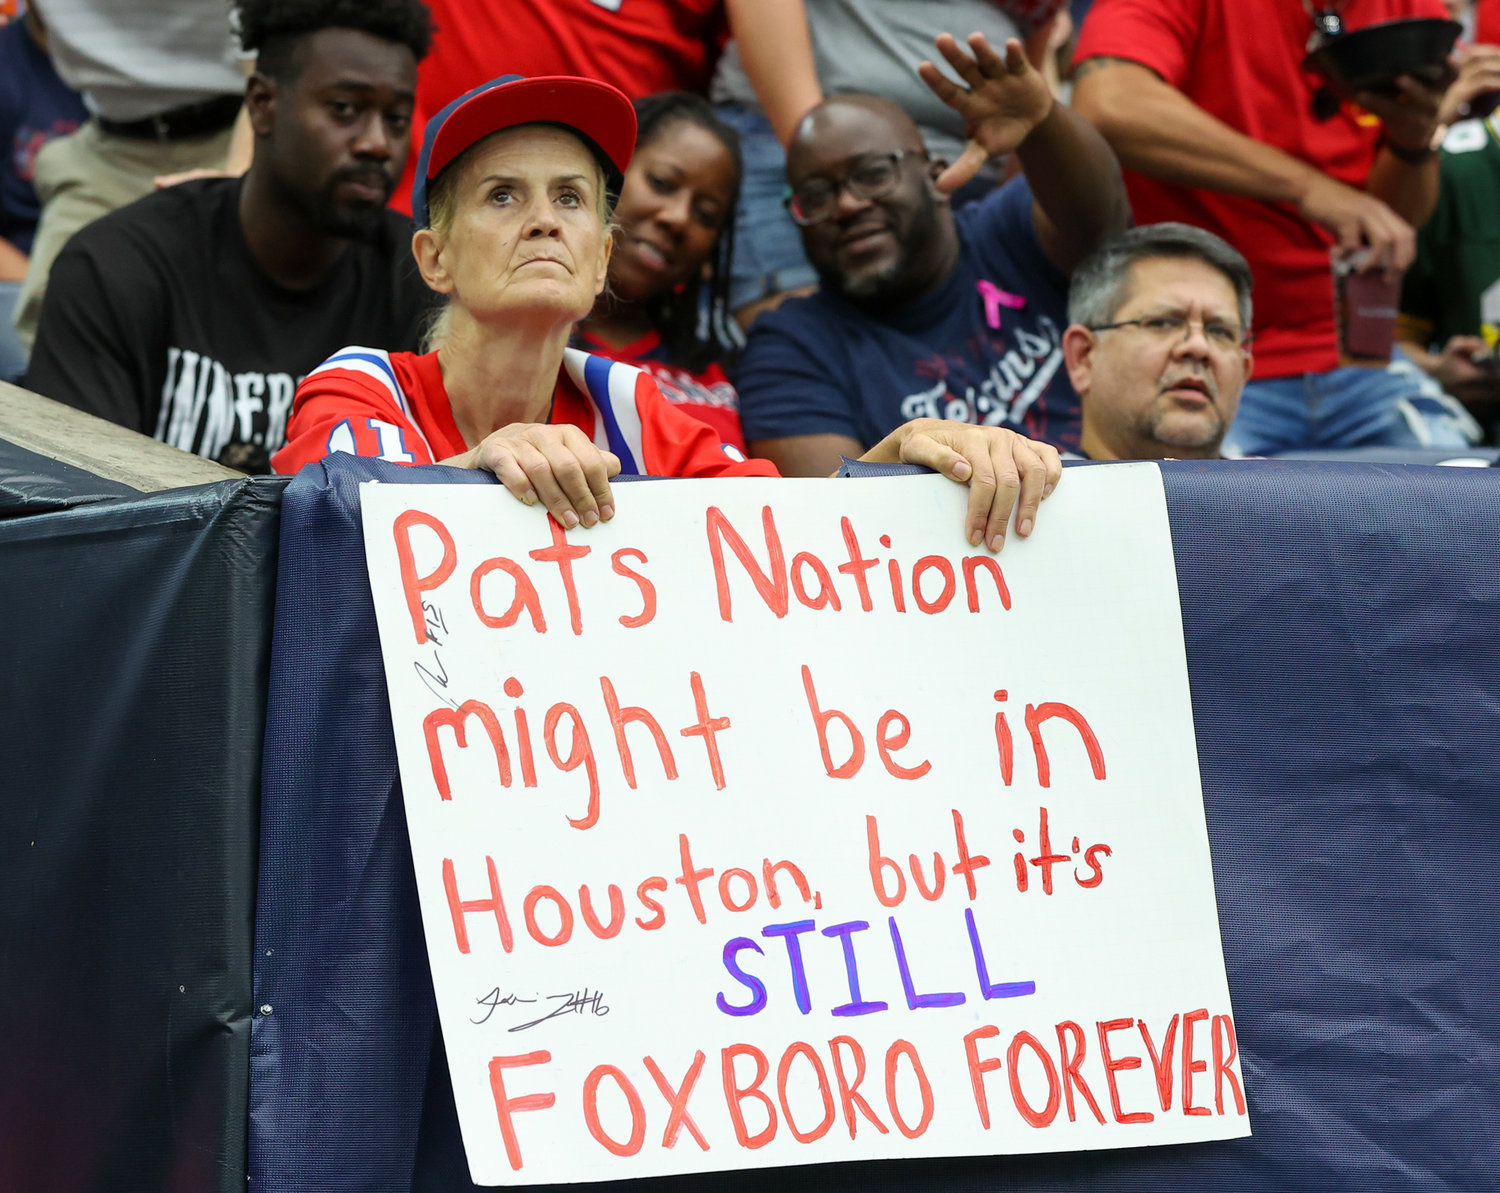 A New England Patriots fan during an NFL game between Houston and New England on October 10, 2021 in Houston, Texas. The Patriots won 25-22.